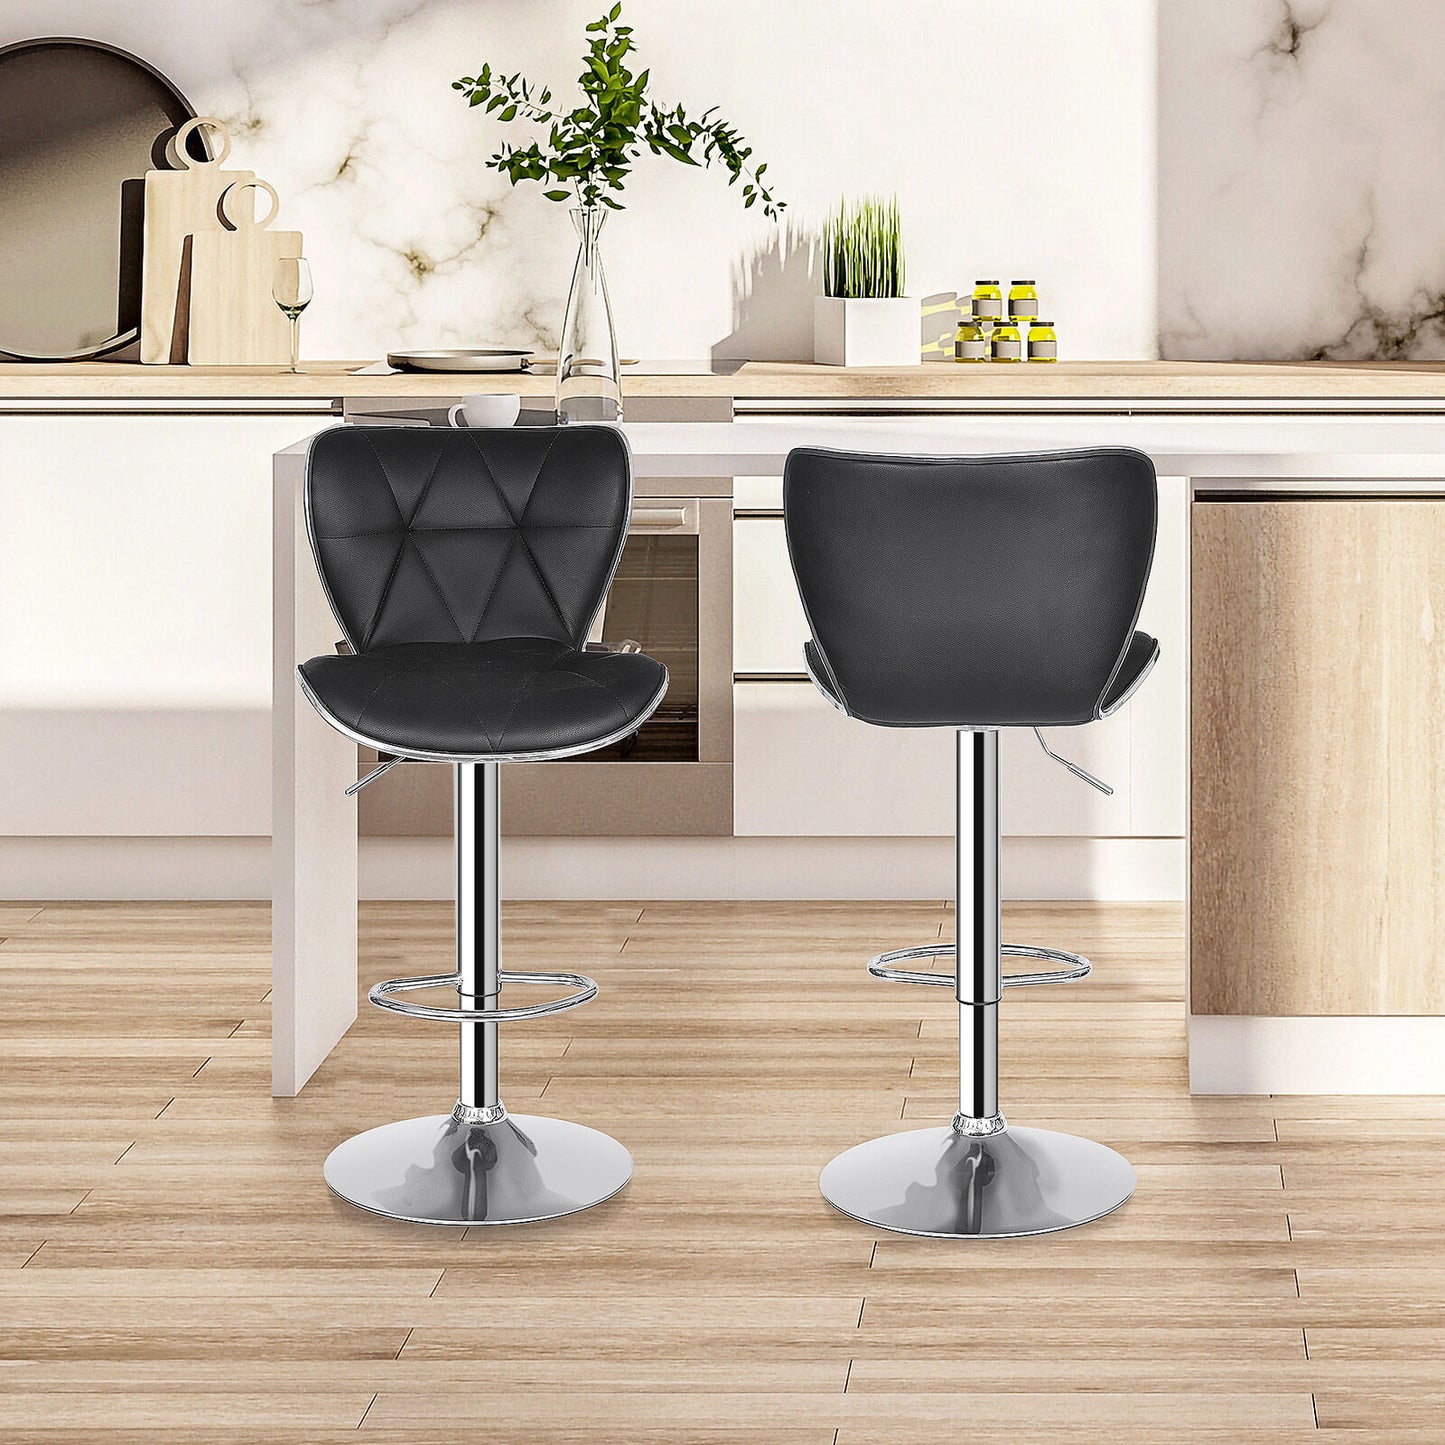 Bar Stools Set of 4 Counter Height PU Leather Shell Back Armless Chairs Black